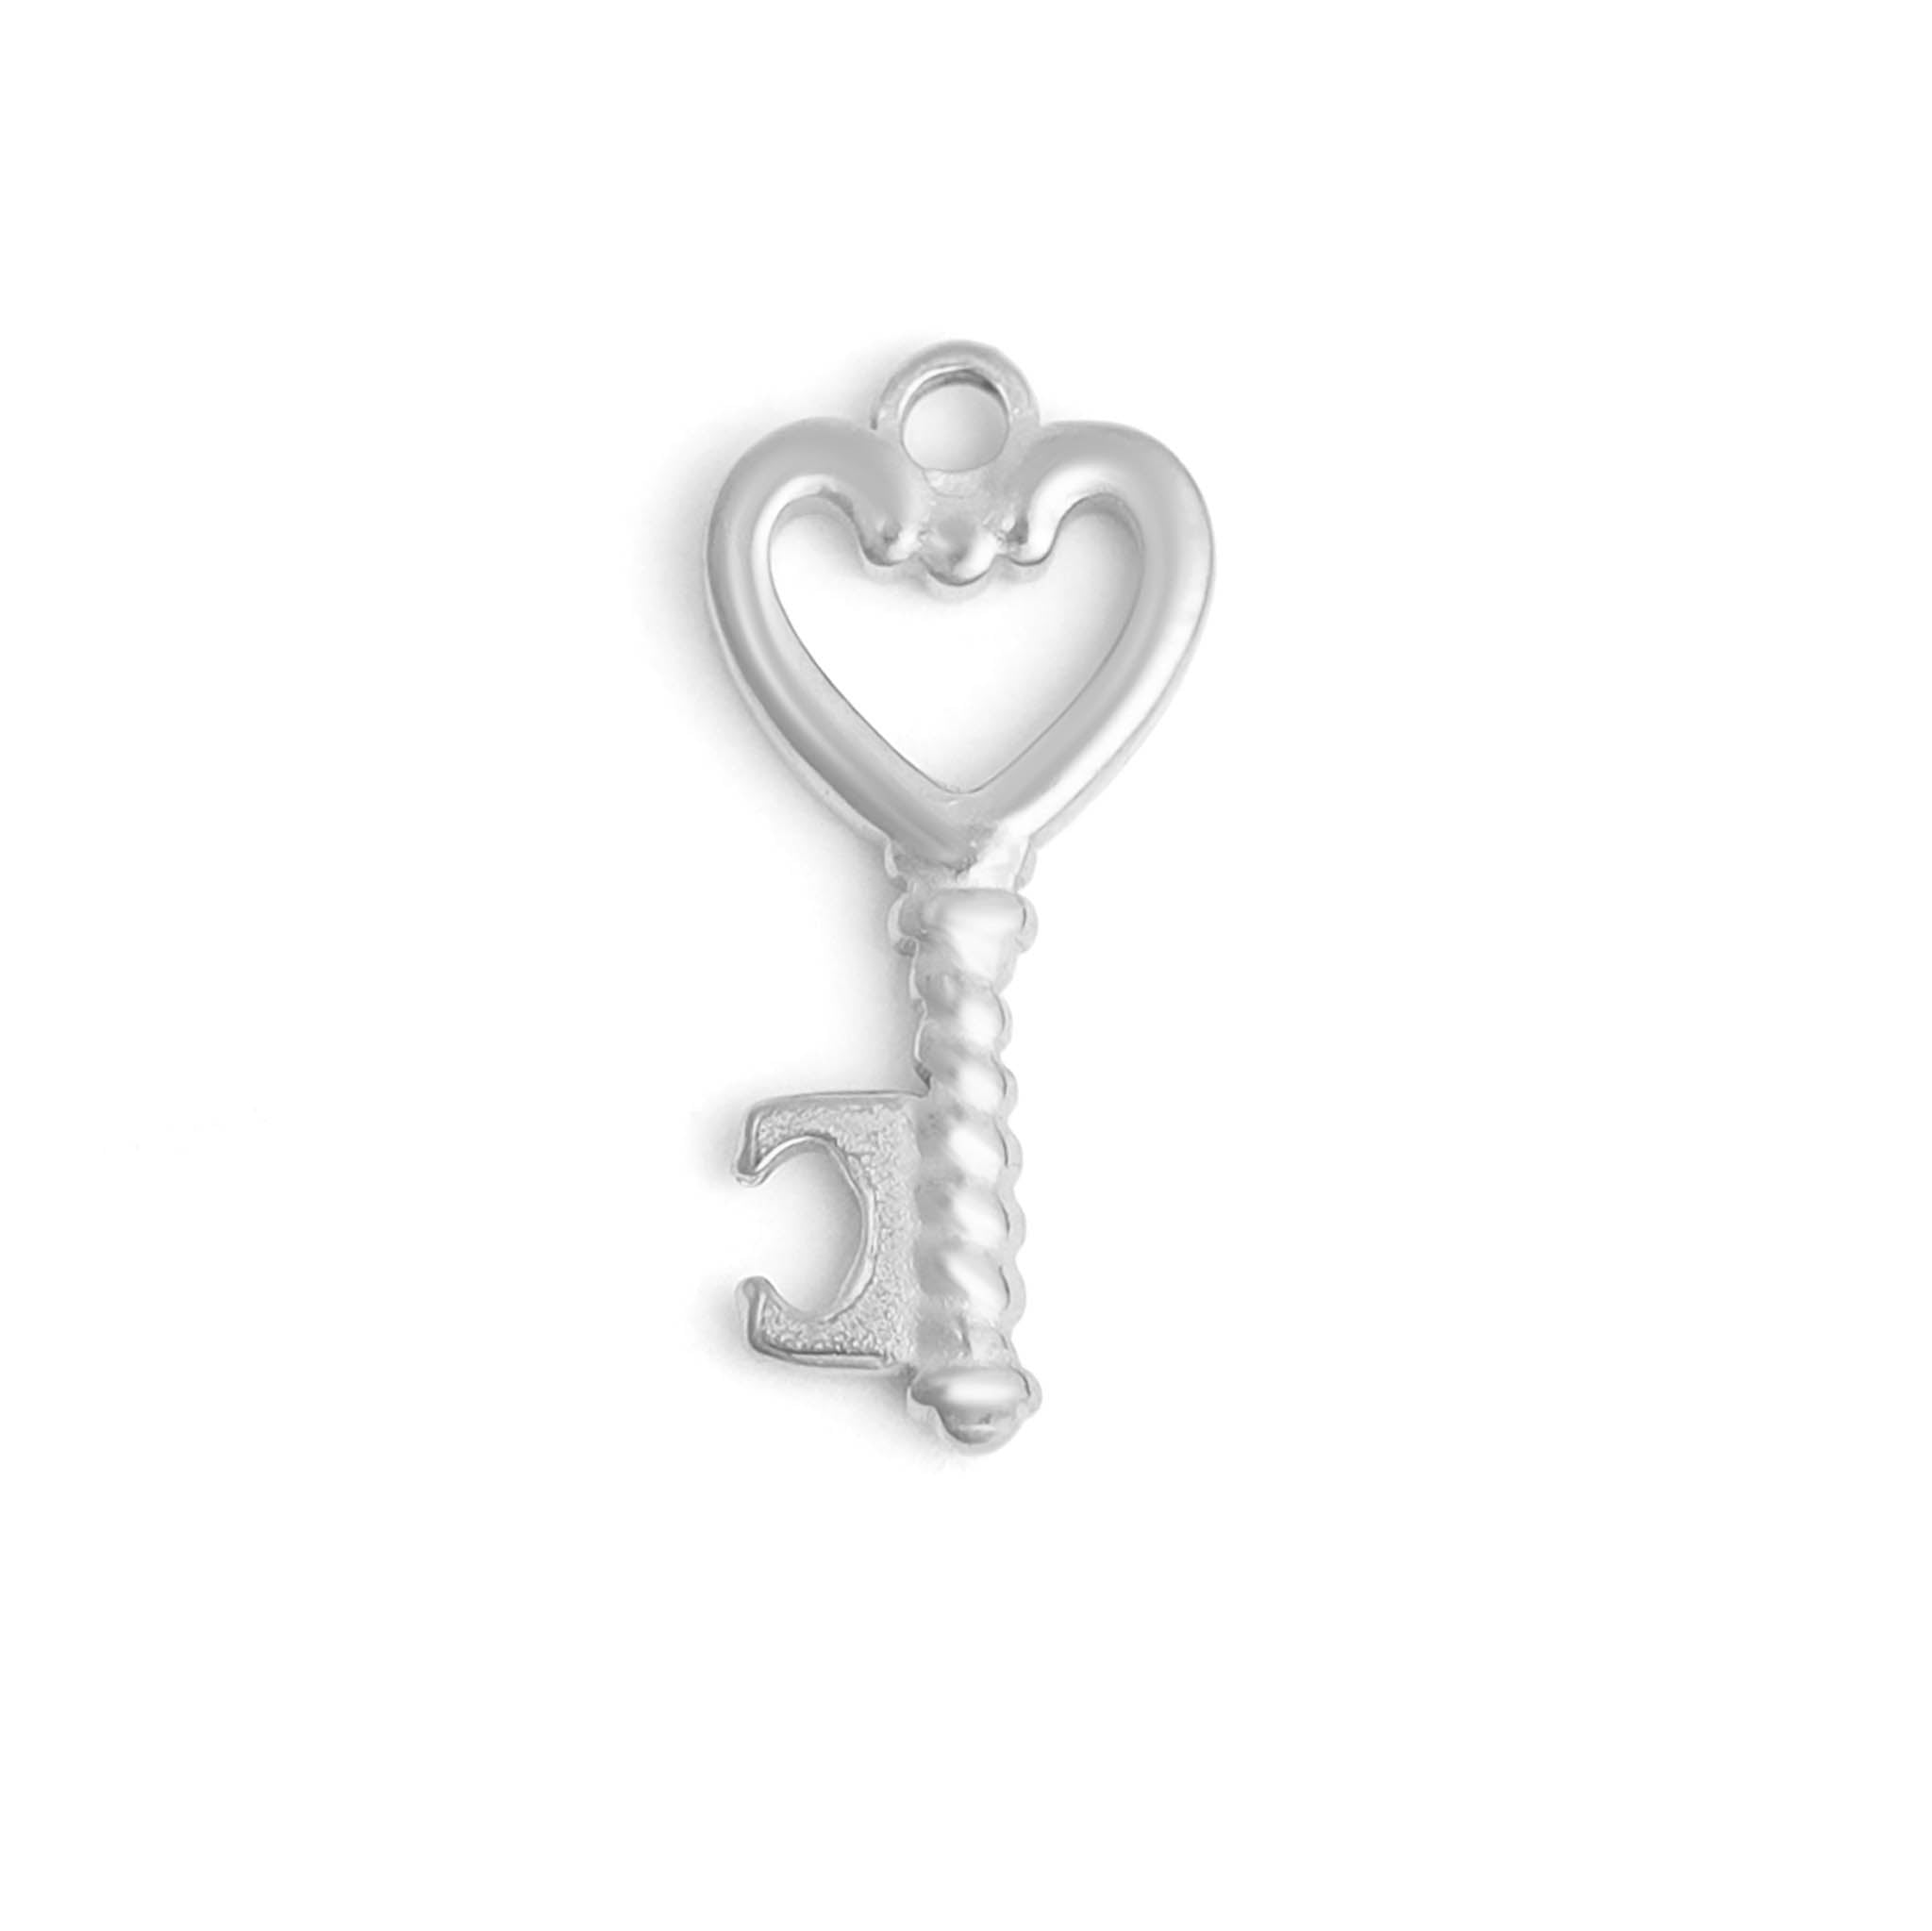 18K Gold PVD Stainless Steel Heart Key Charm / PDL0110